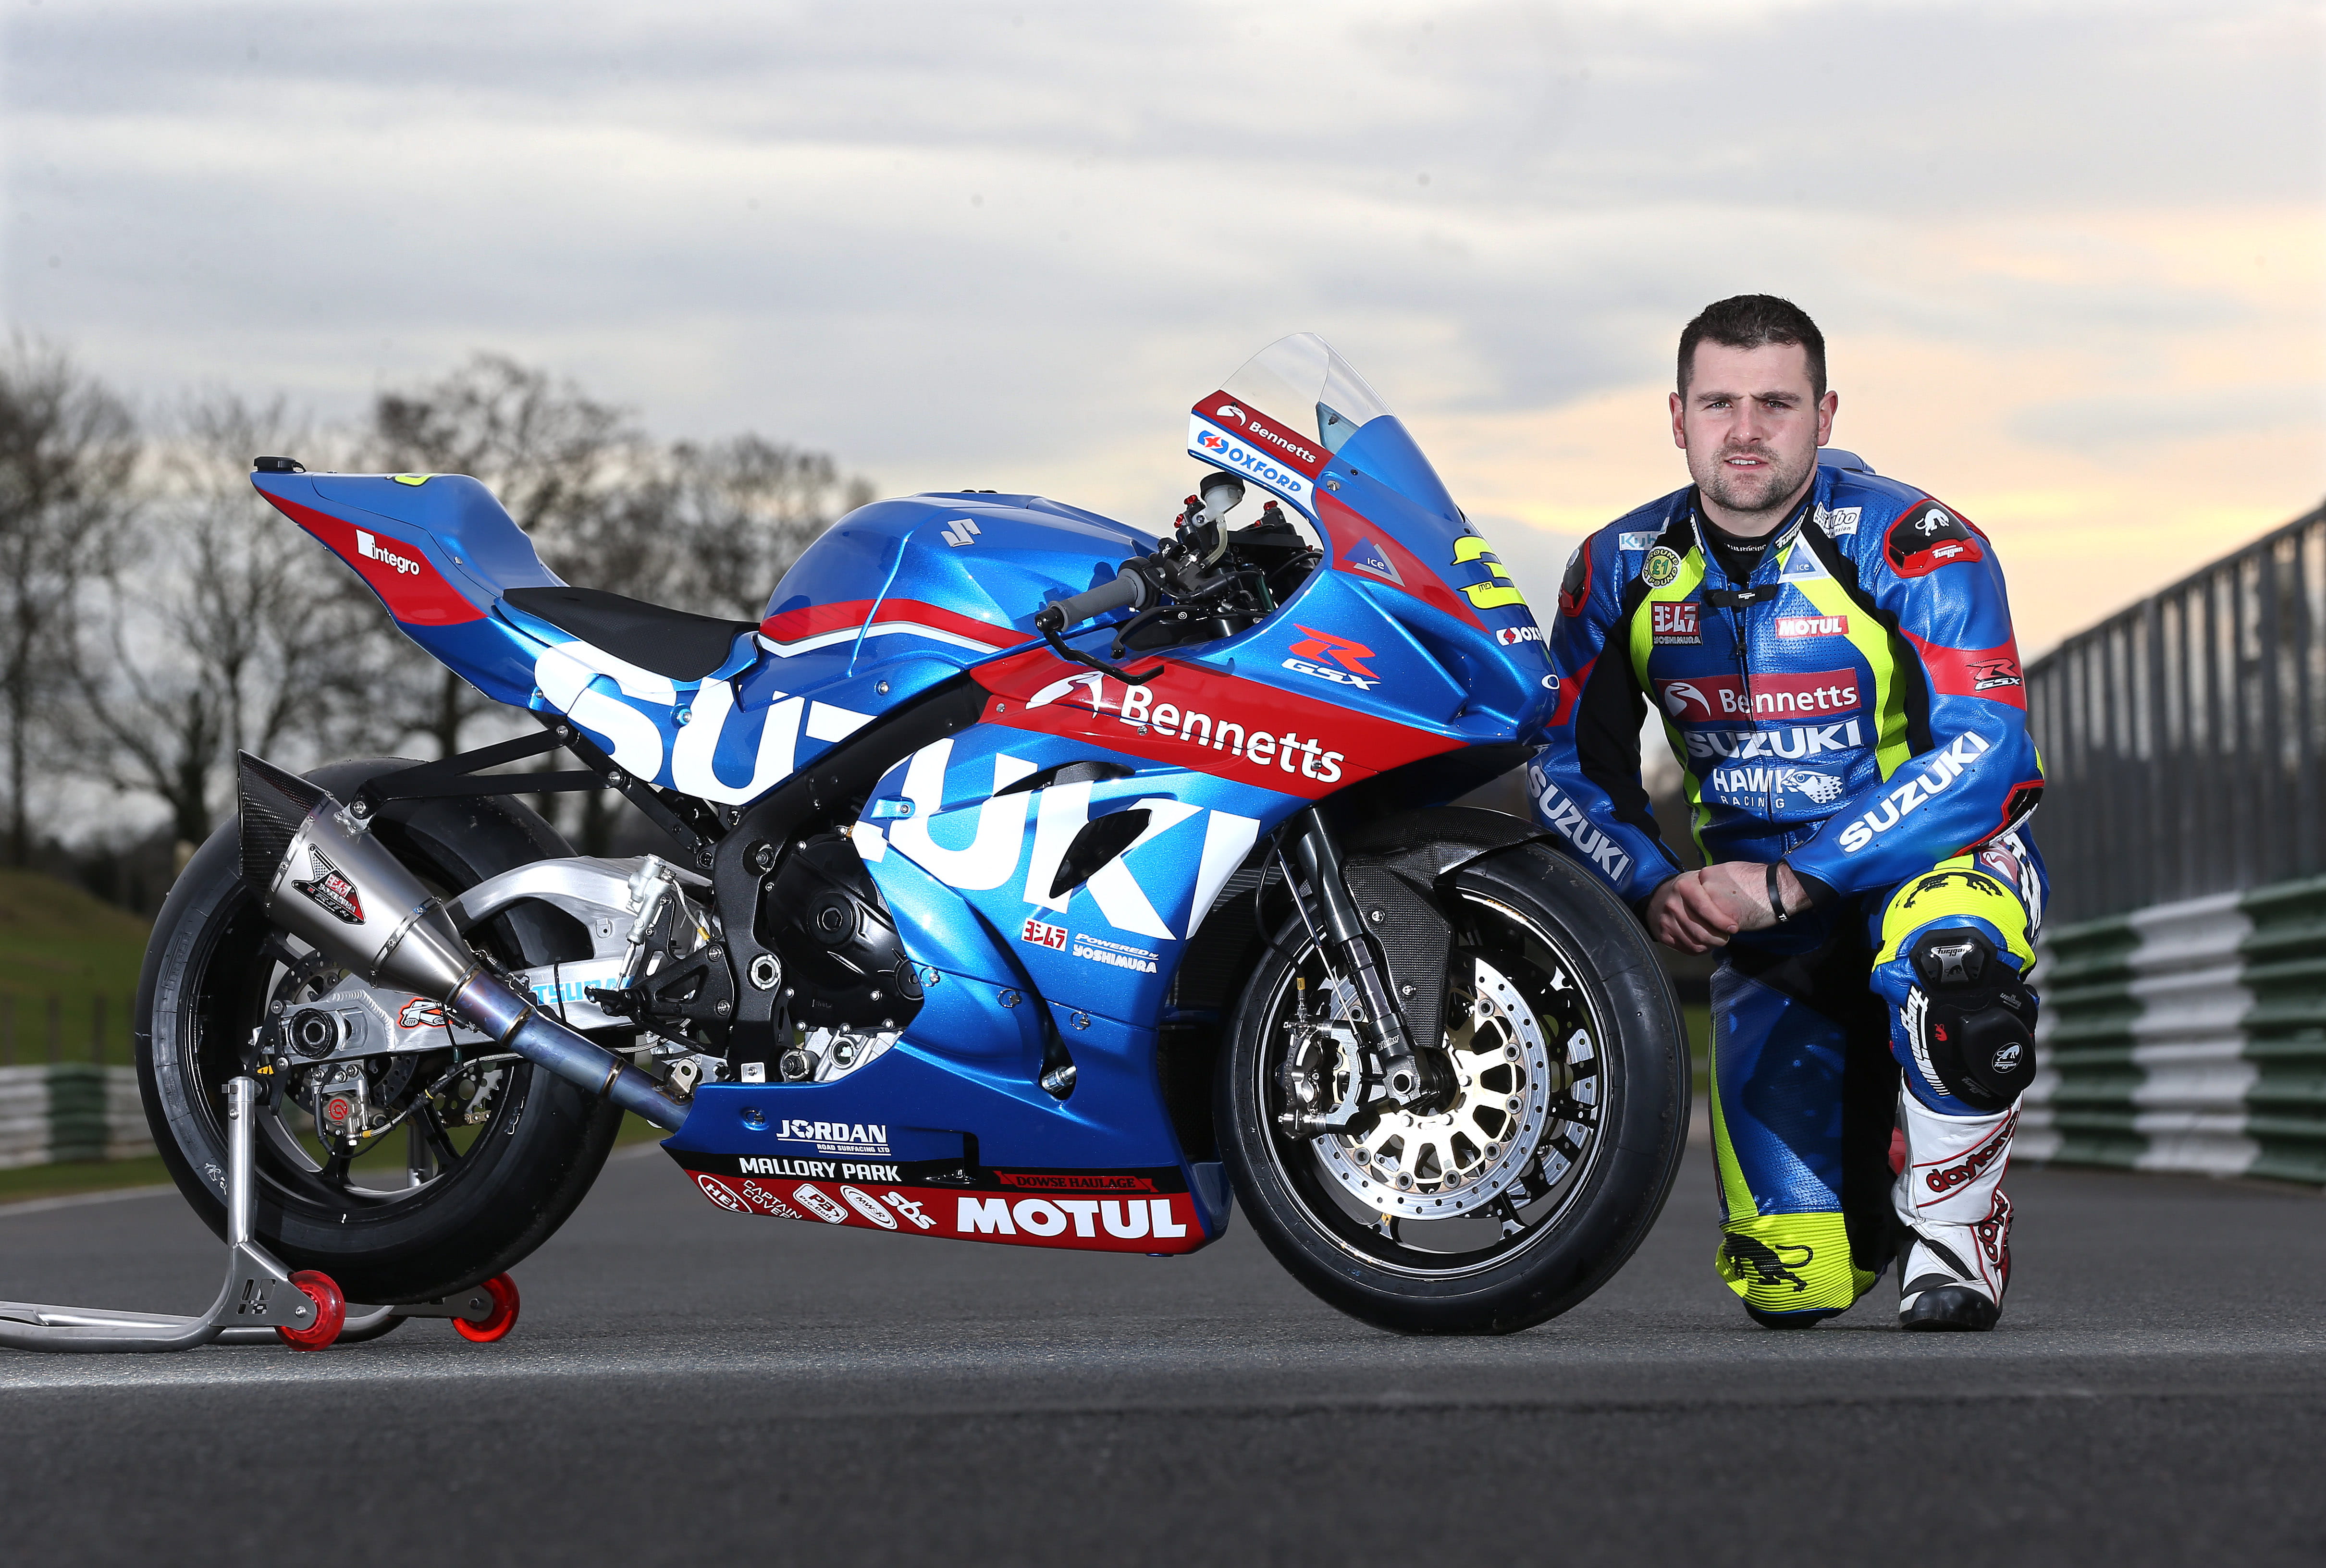 Michael Dunlop races for the Bennetts Suzuki by Hawk Racing Team in 2017 at the Isle of Man TT